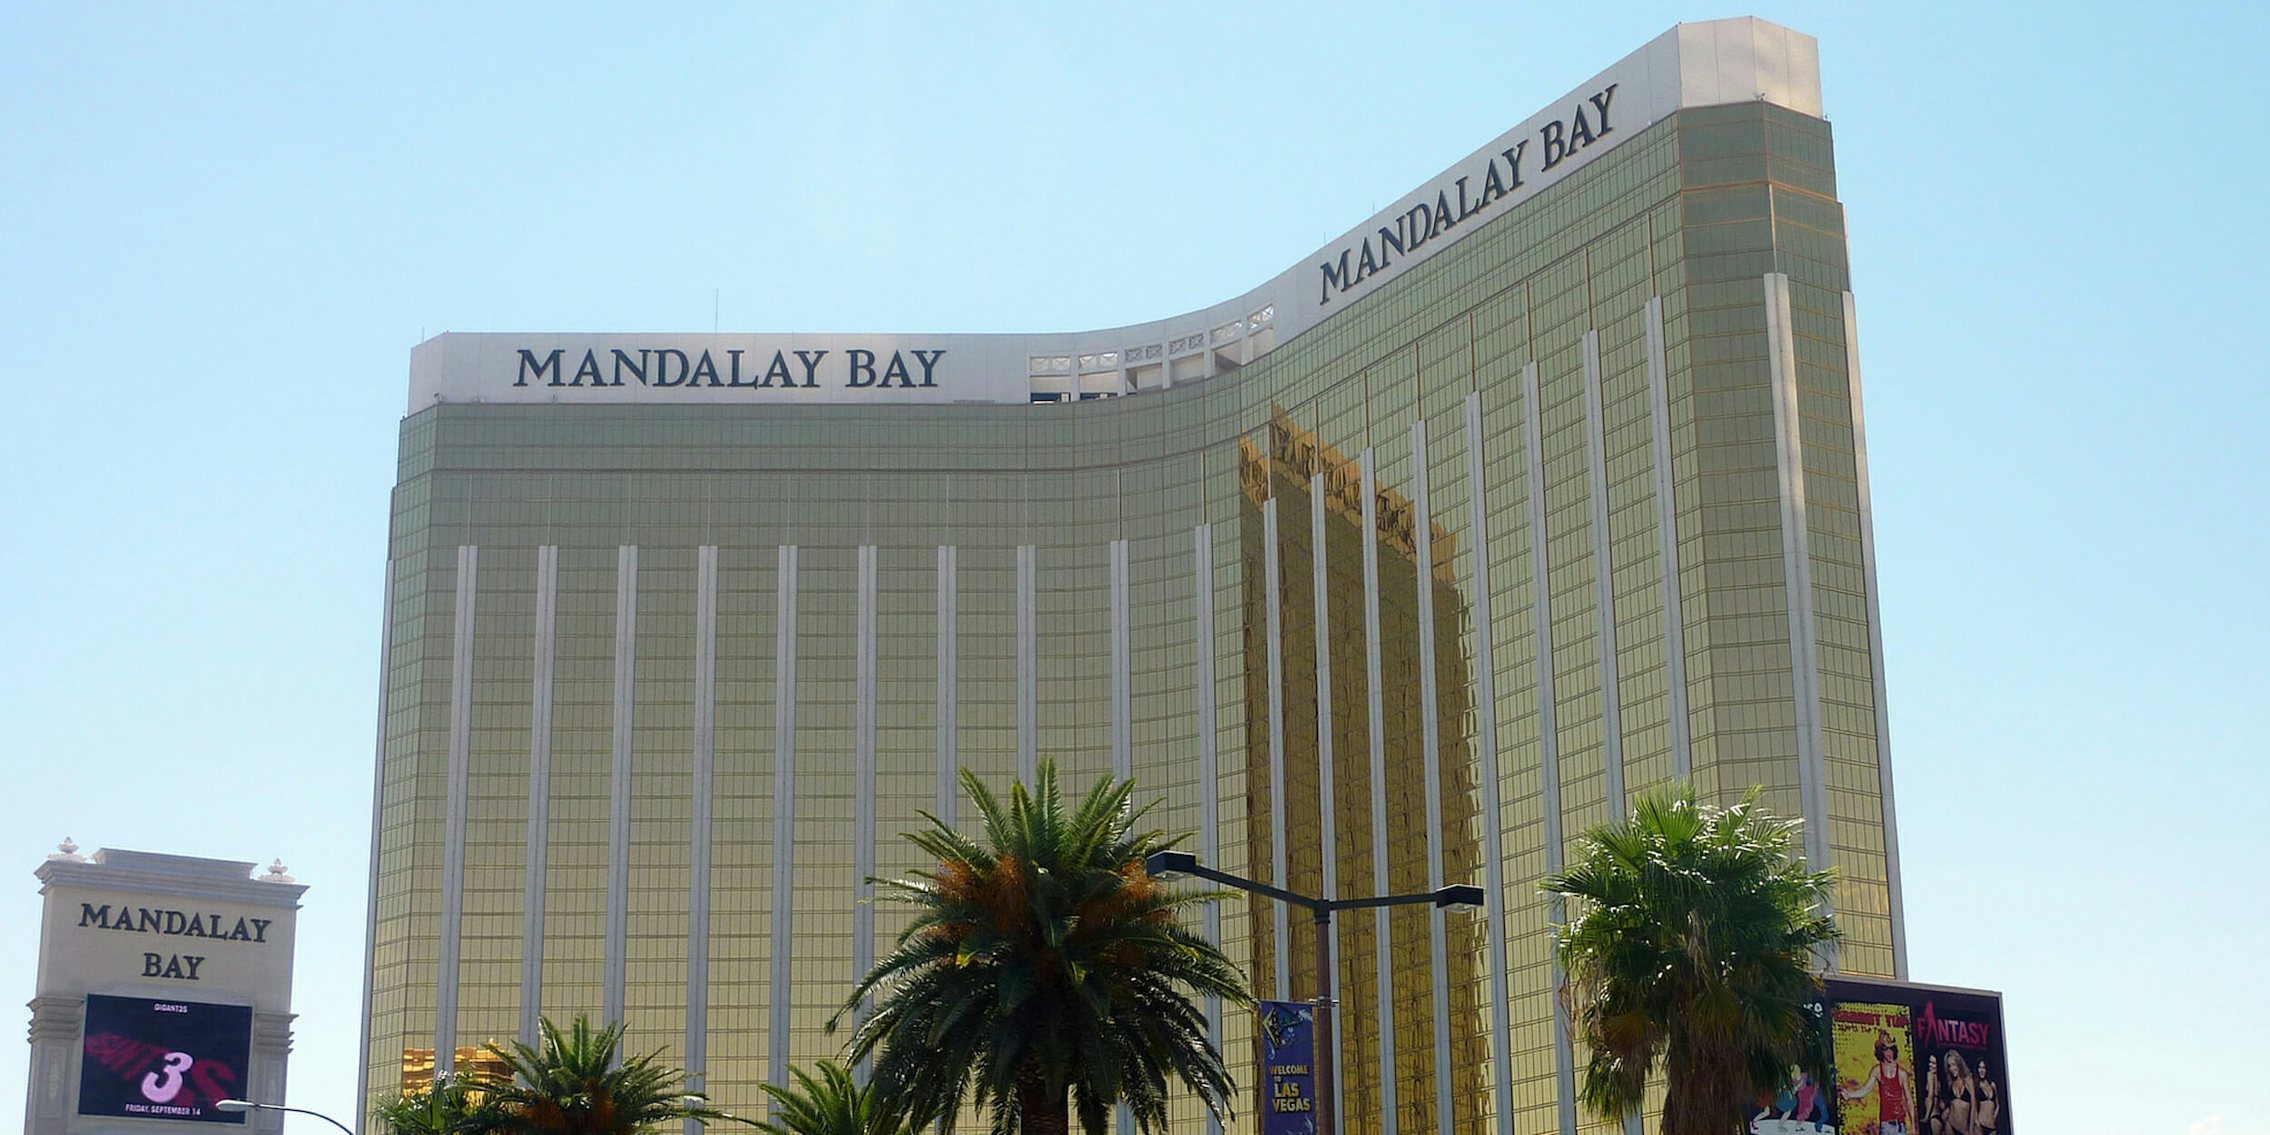 Who is Stephen Paddock, the alleged Mandalay Bay, Las Vegas shooter?